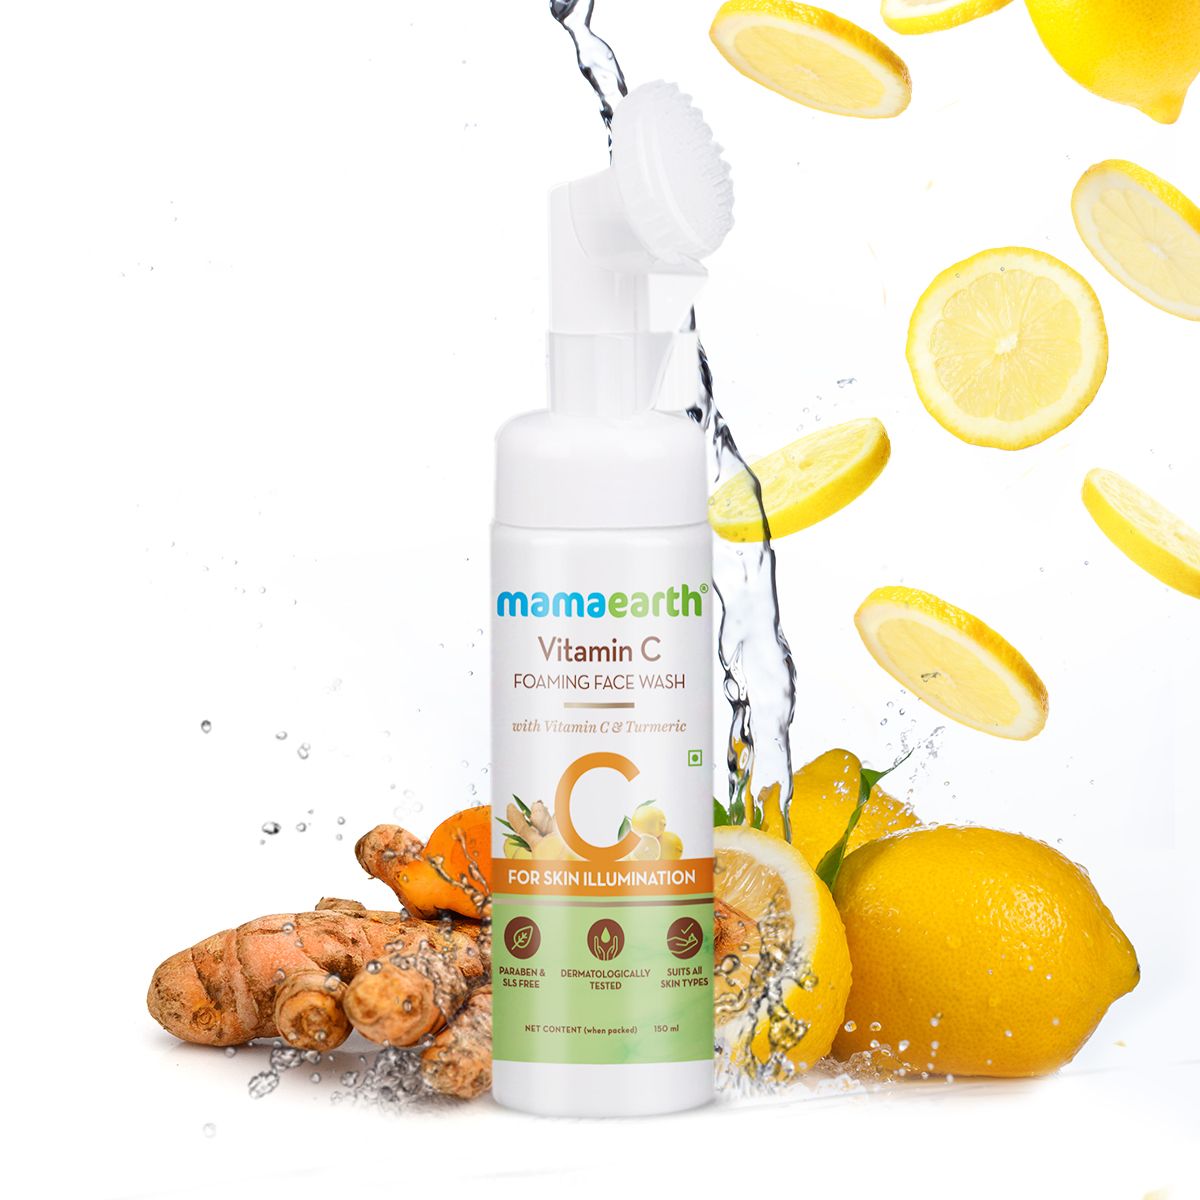 Mamaearth Vitamin C Foaming Face Wash Better Than Others Available In The Market